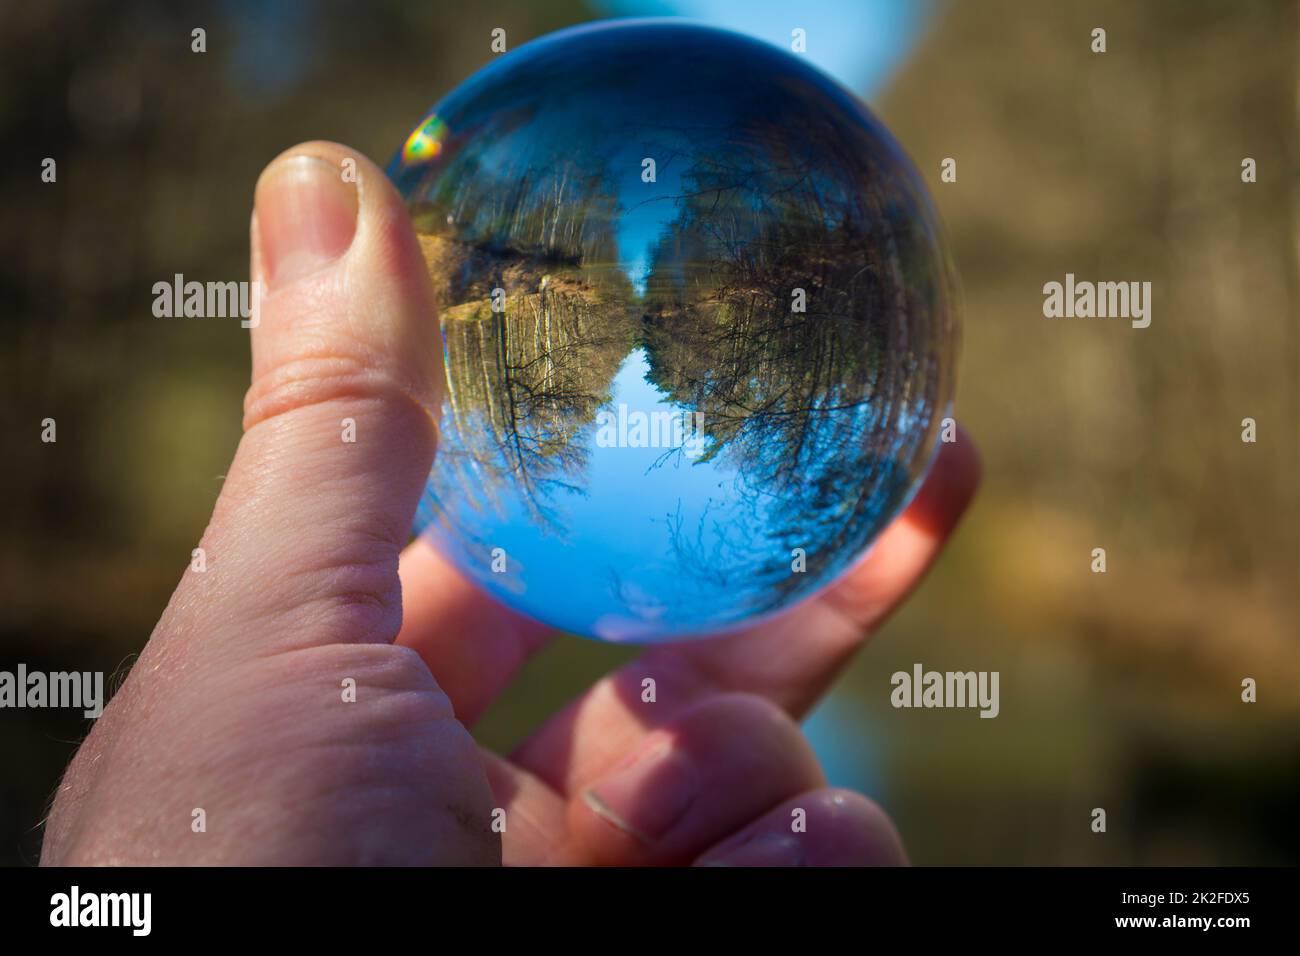 Hand holding glass ball with inverted nature and landscape image Stock Photo